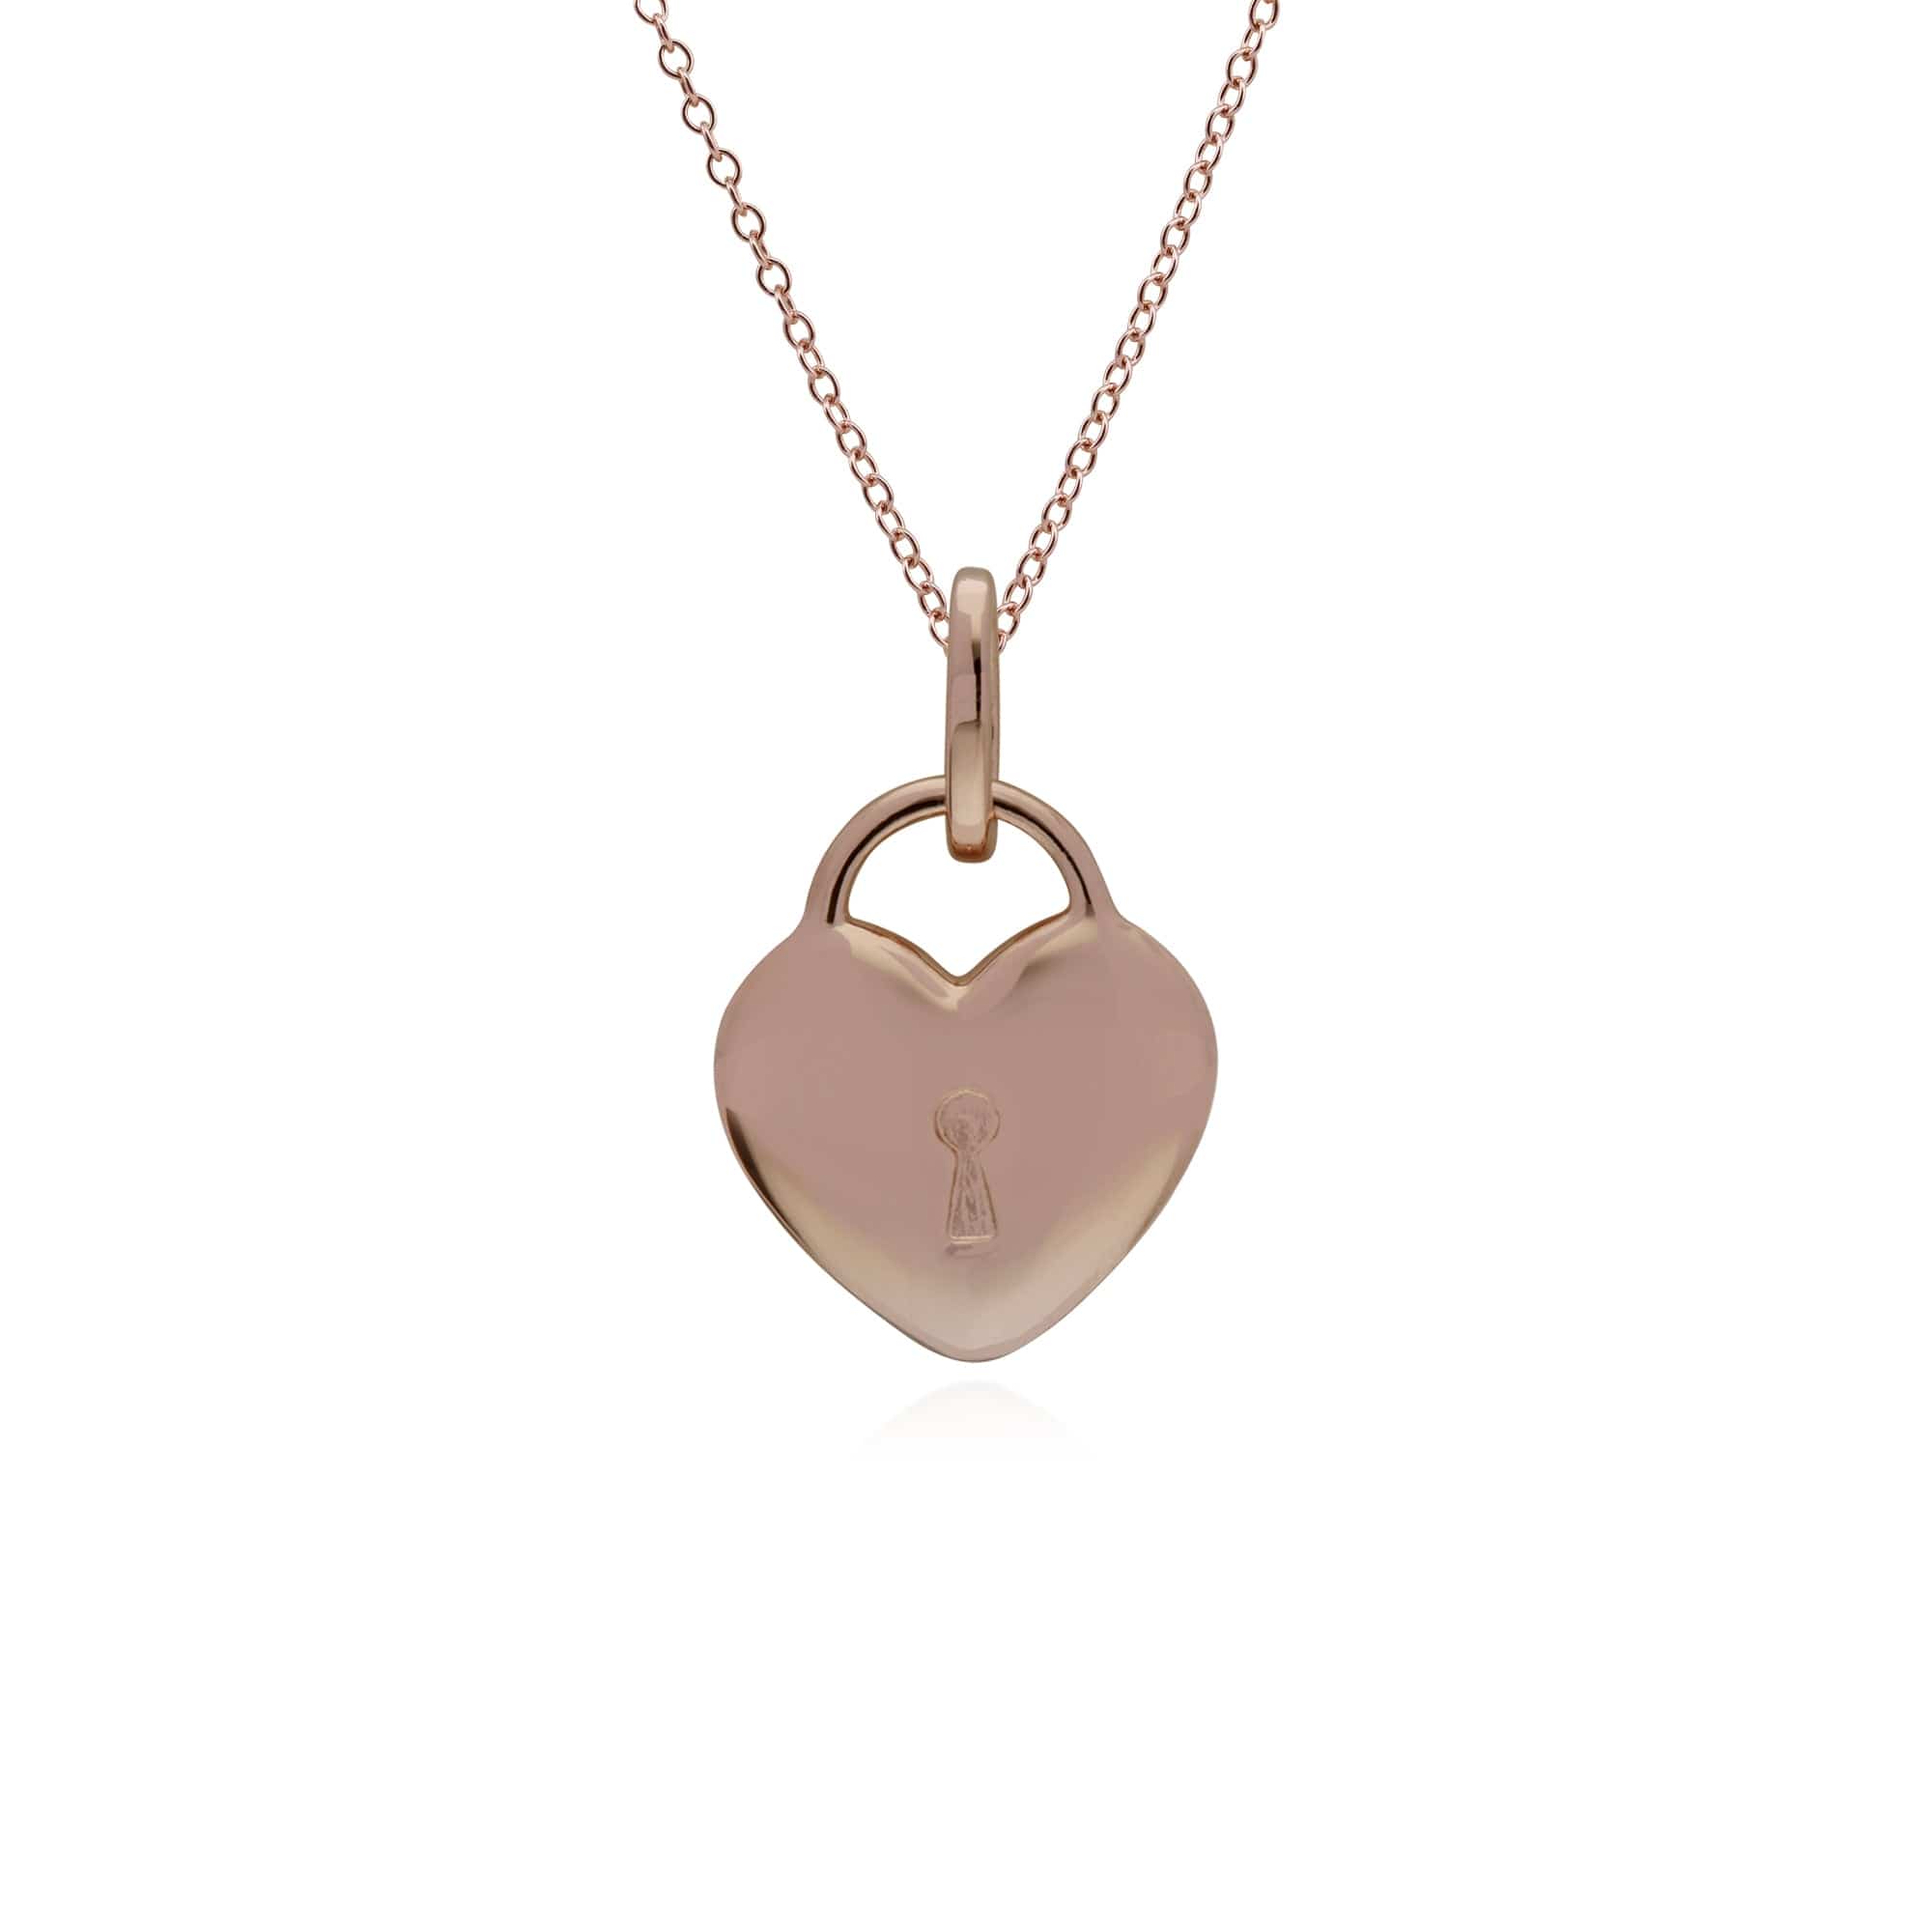 270P026304925-270P026901925 Classic Heart Lock Pendant & Amethyst Key Charm in Rose Gold Plated 925 Sterling Silver 3